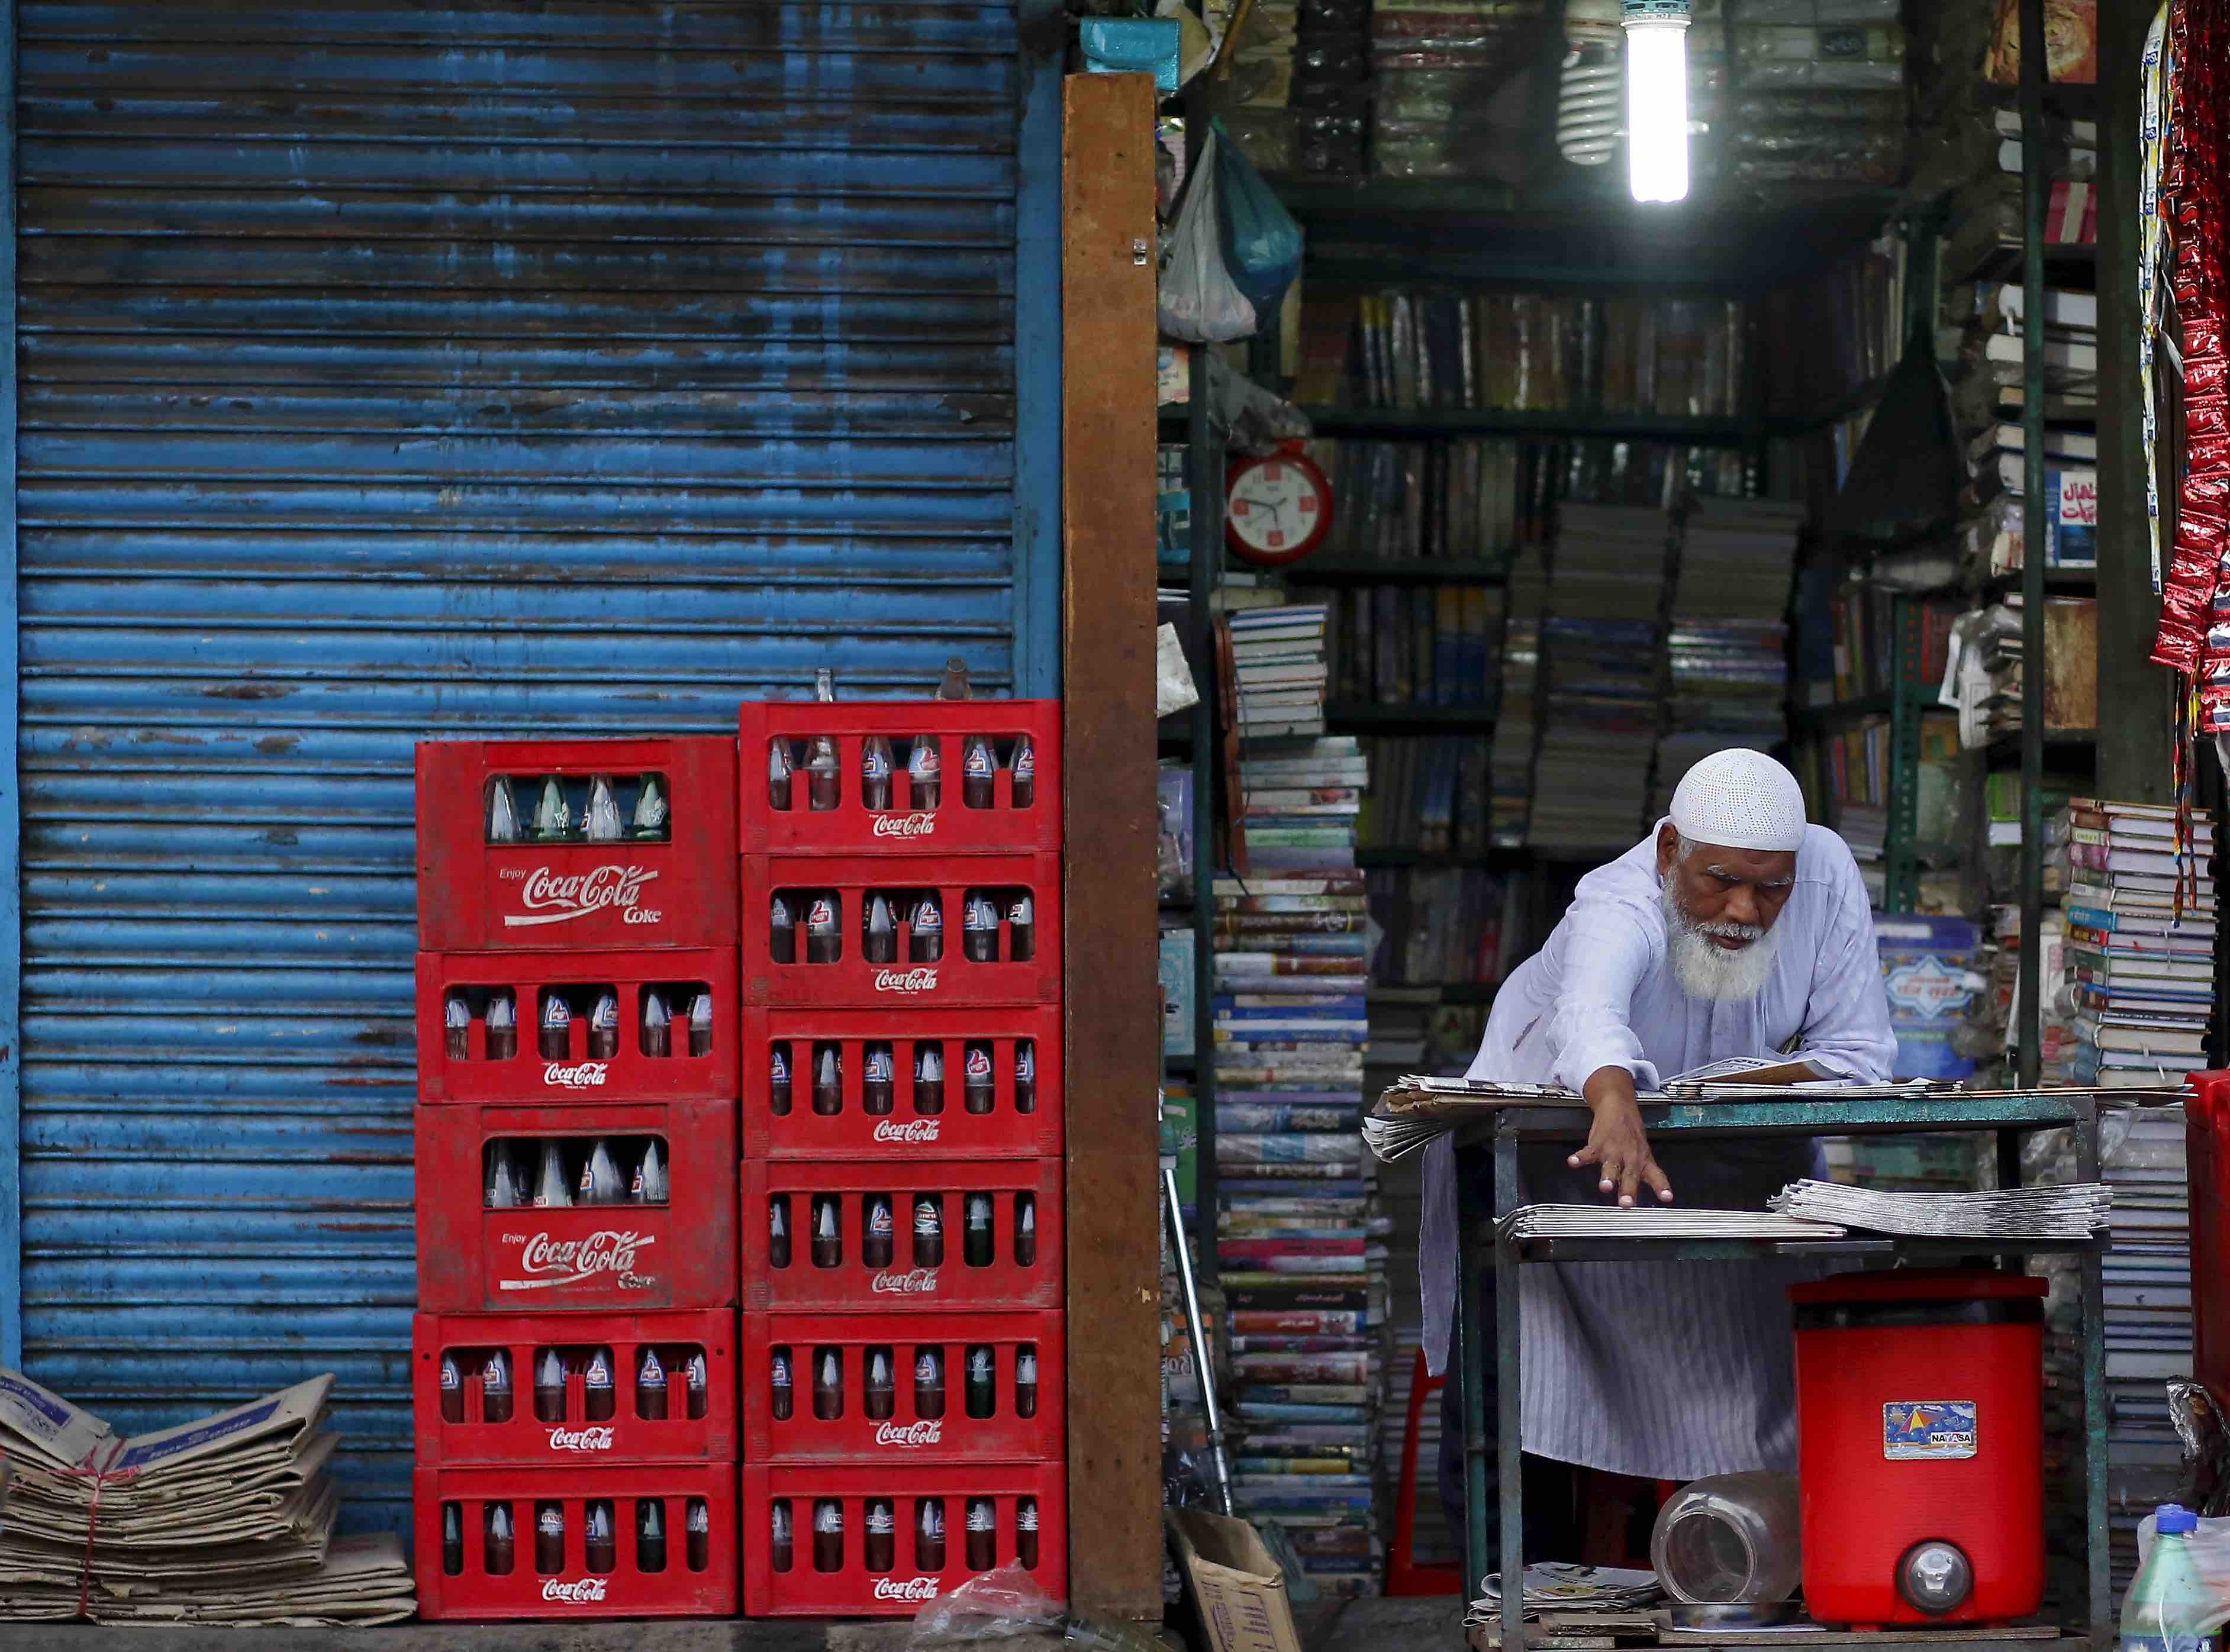 A shopkeeper extends his hand as he arranges newspapers for sale at his shop during early morning in the old quarters of Delhi, India, July 2, 2015. REUTERS/Anindito Mukherjee